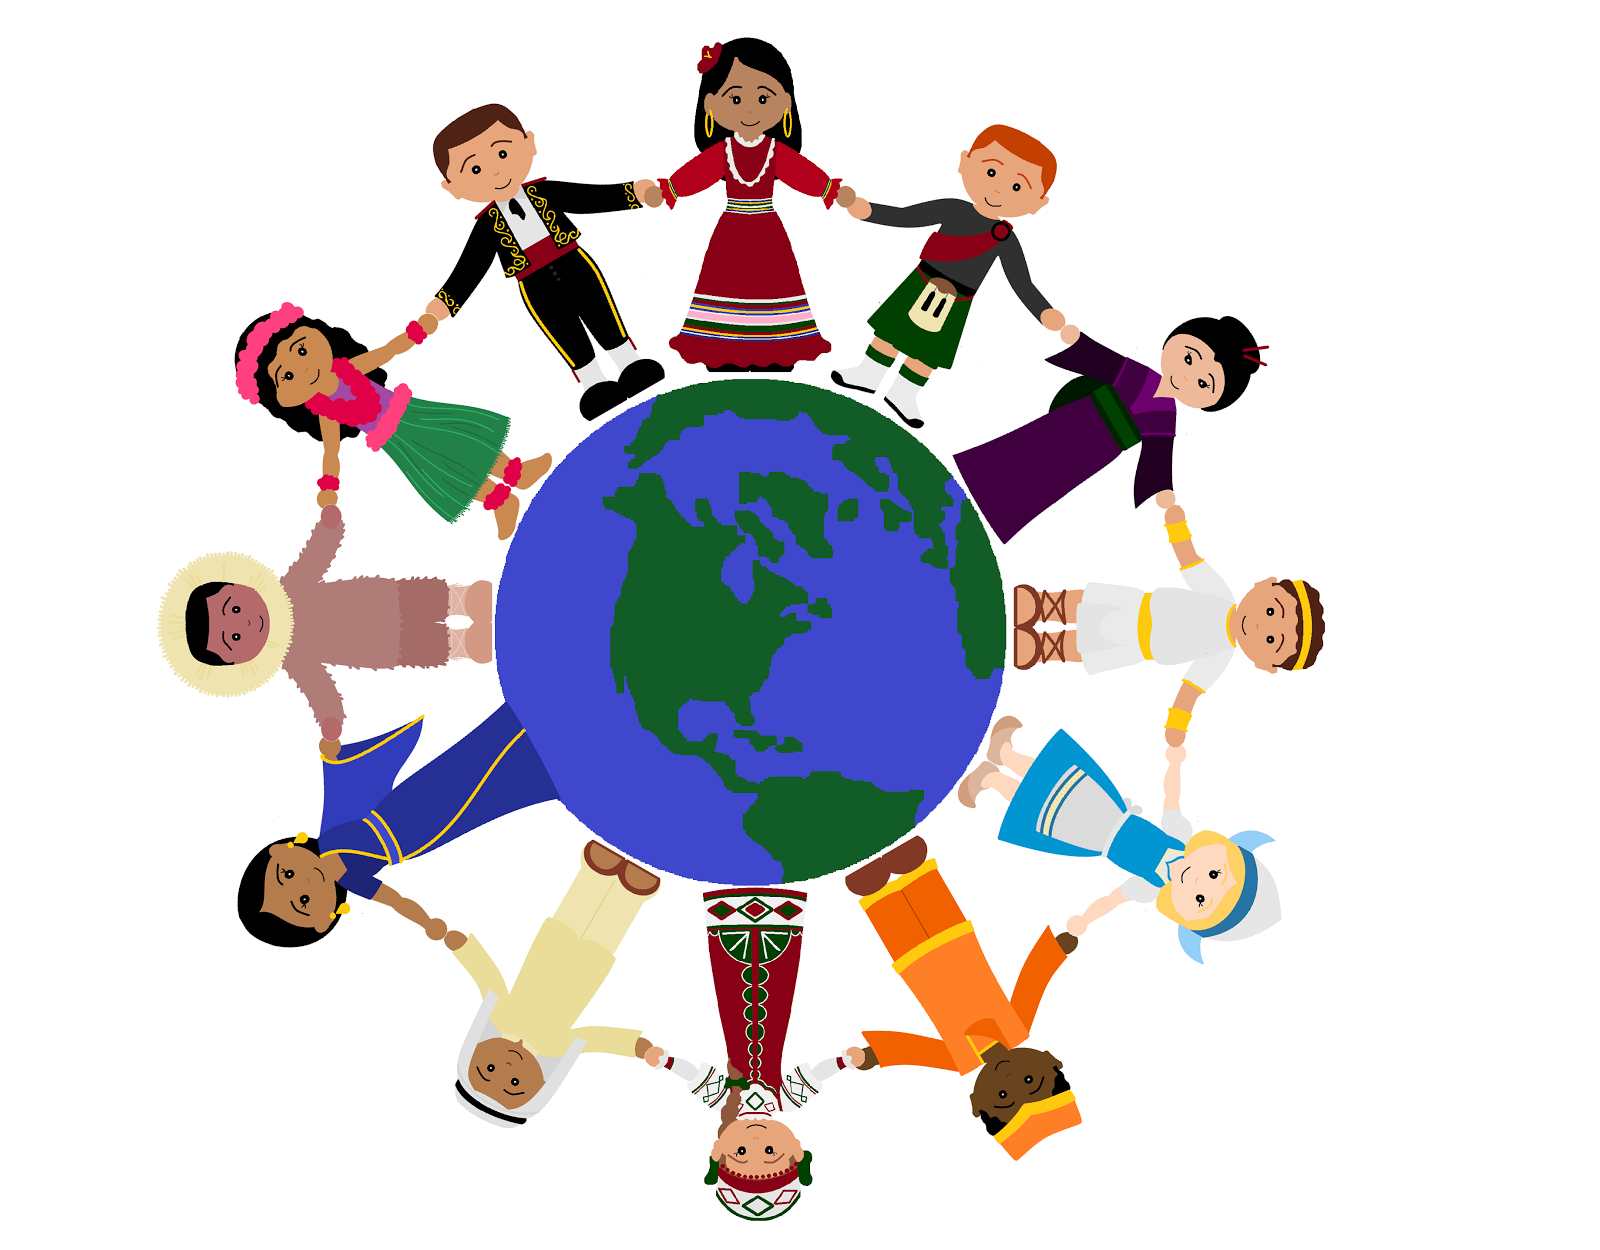 Hands Holding Globe Of The World - ClipArt Best